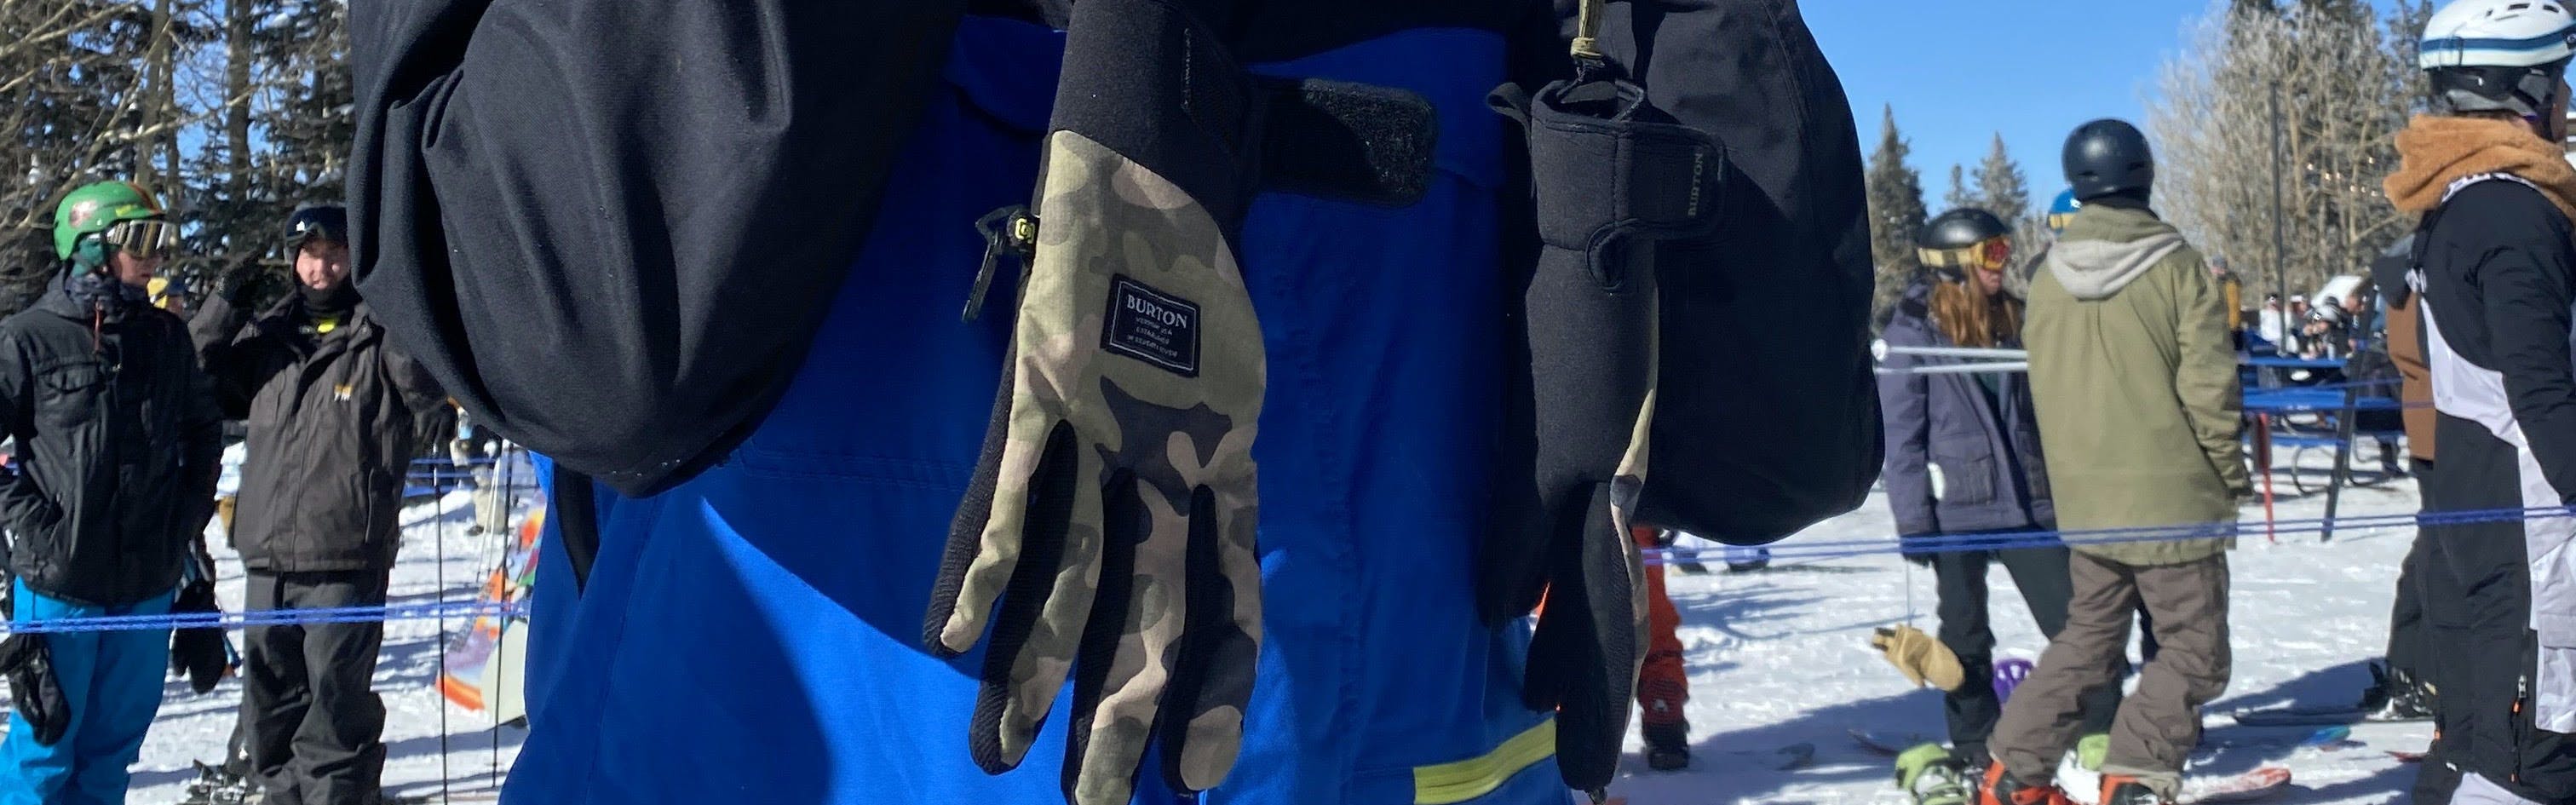 A snowboarder holding the Burton Park Glove by the durable leashes.